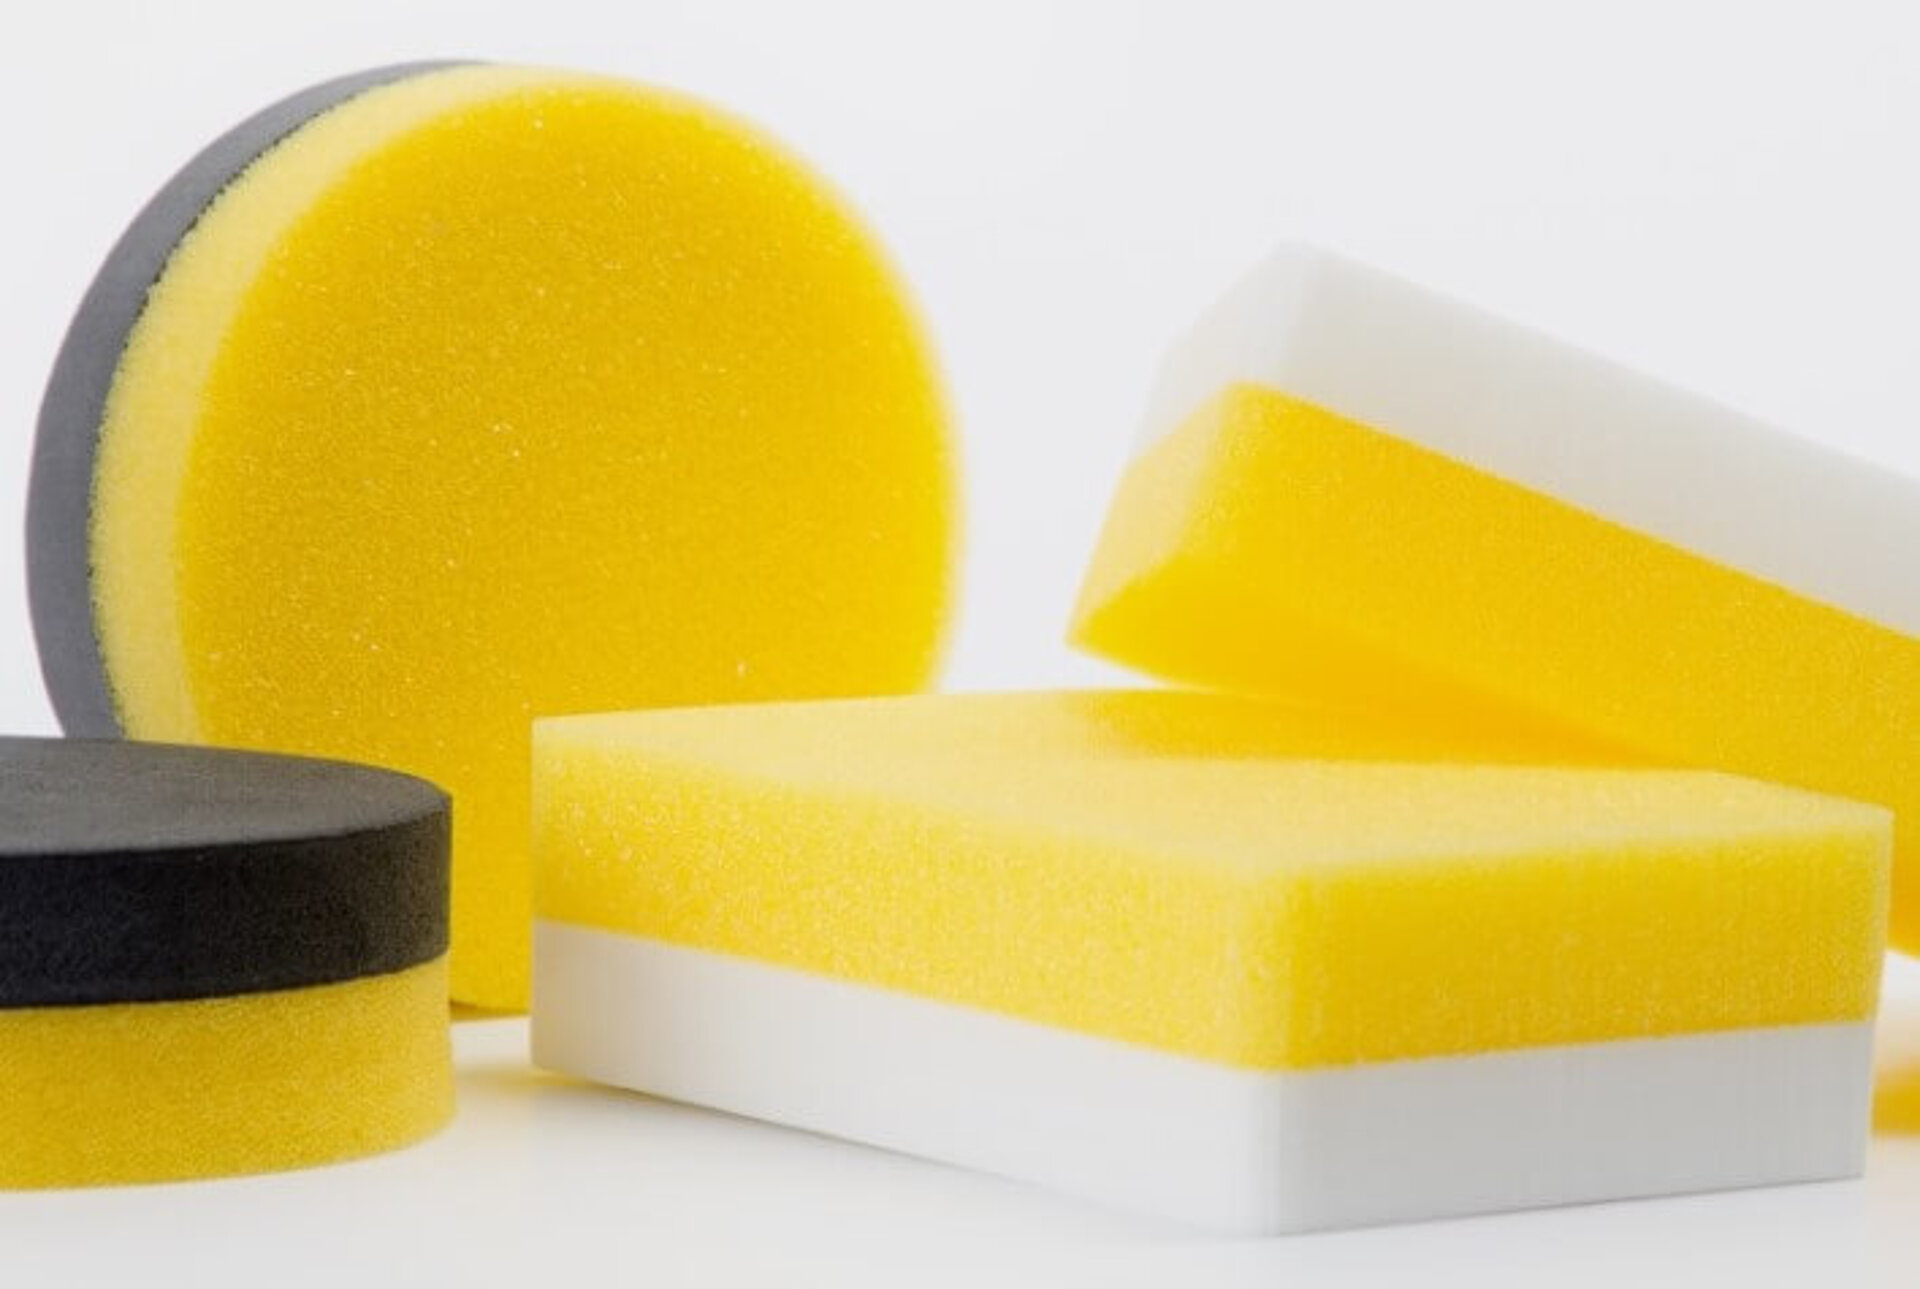 Application sponges and other foam products are suitable to apply care products as well as for care